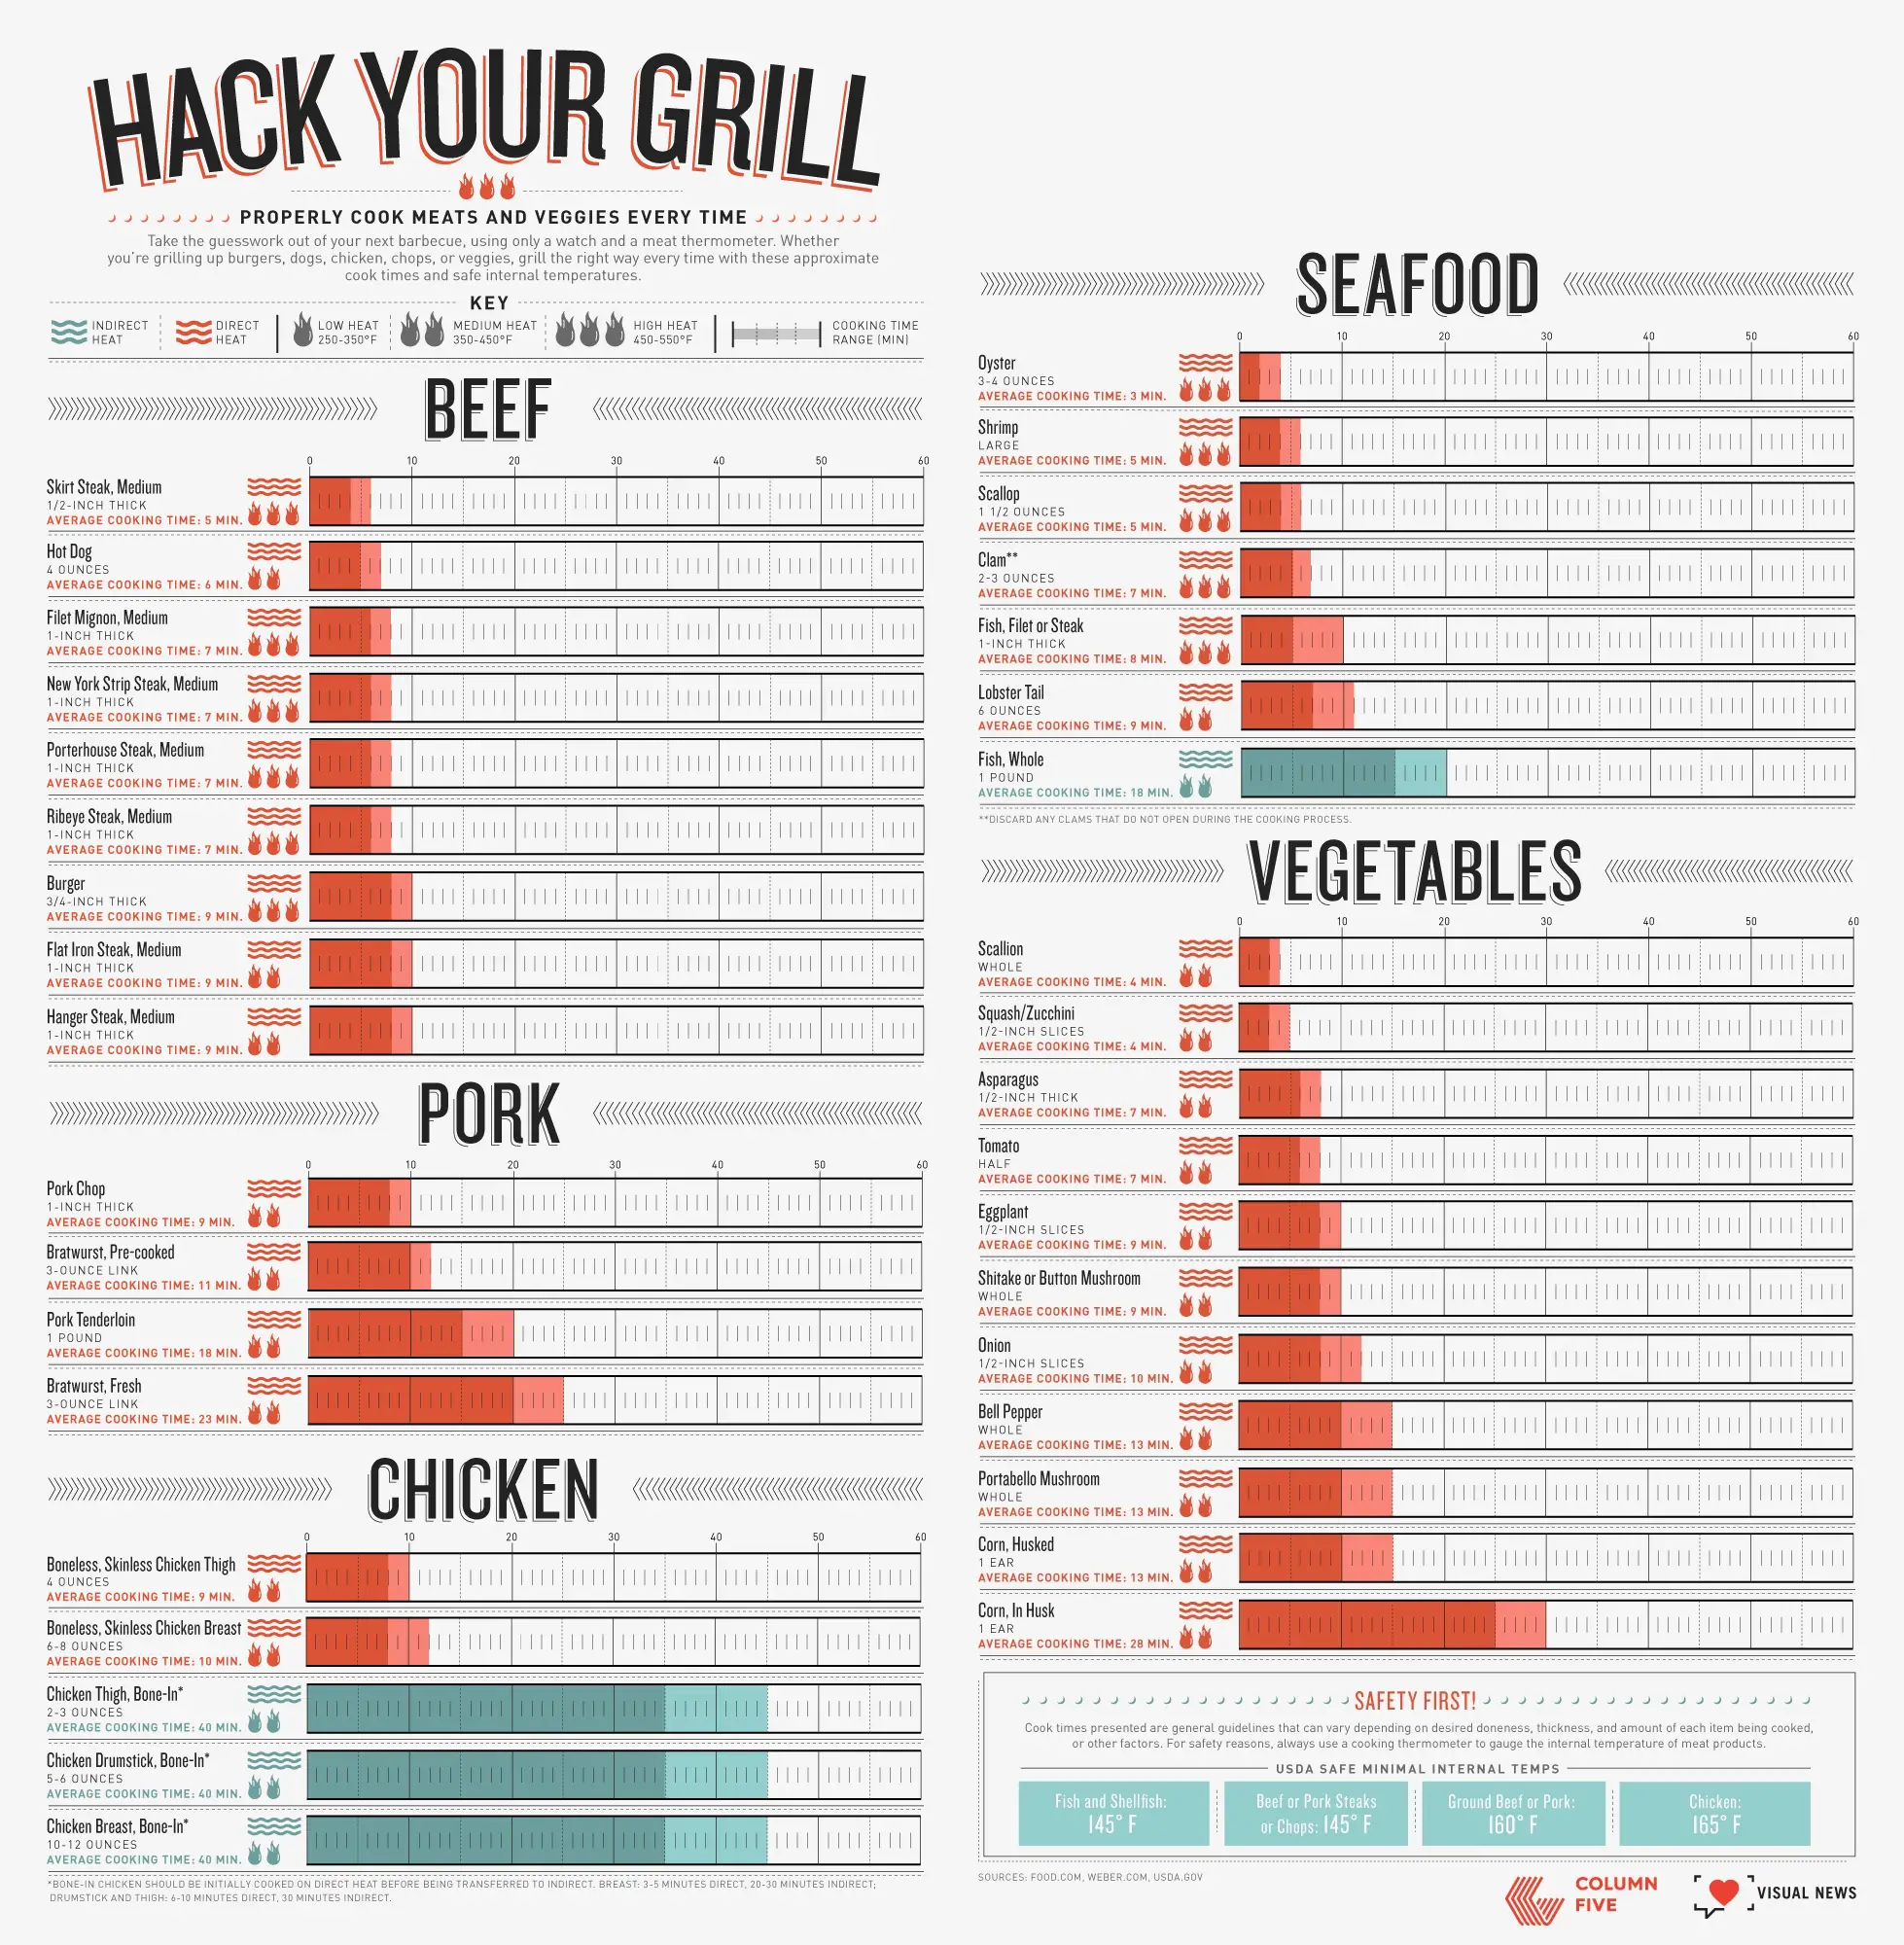 Recipe of Grilled Chicken Temperature Chart